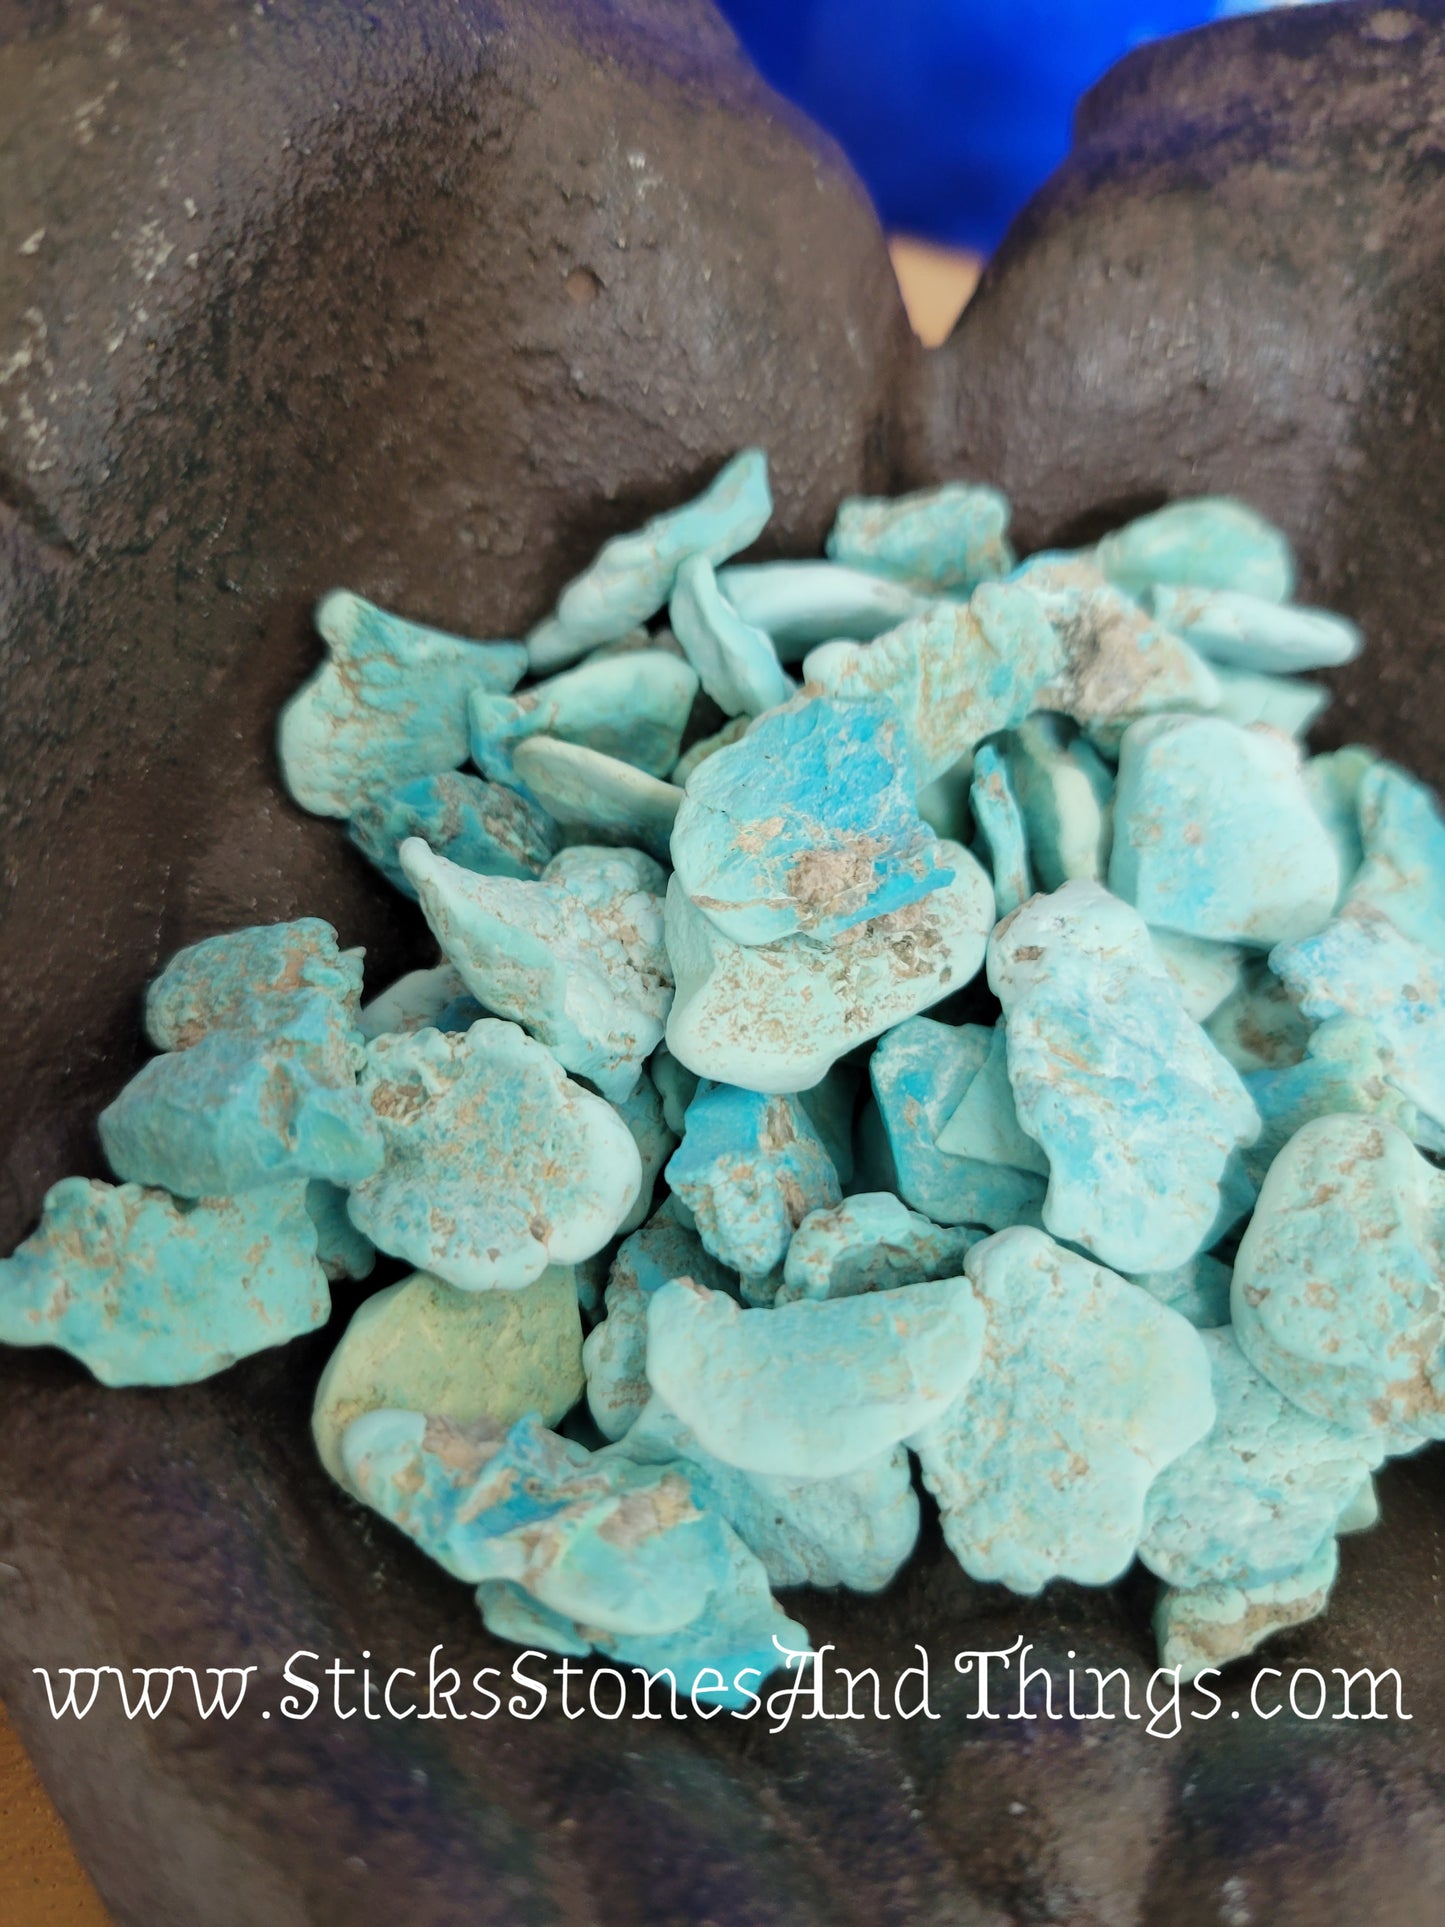 Turquoise from Sleeping Beauty Mine in Az, USA, 100% natural rough .75 inches